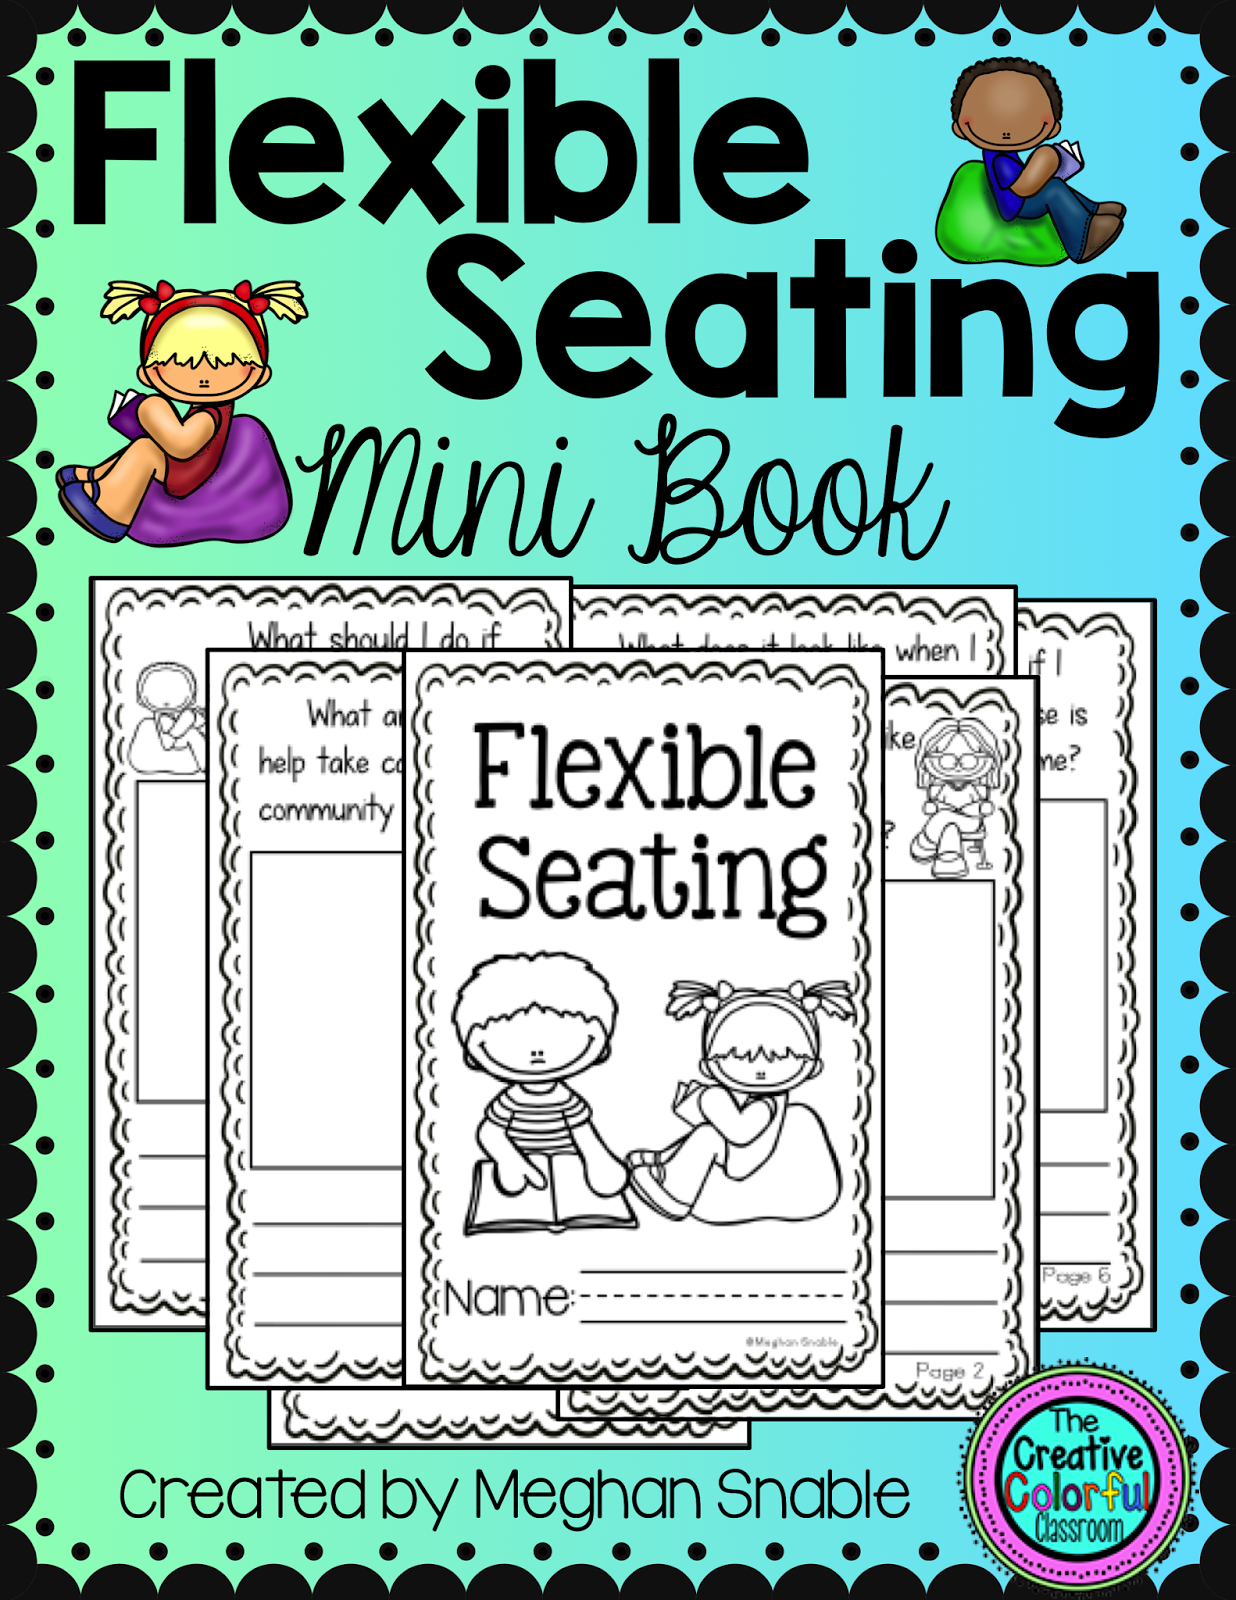 The Creative Colorful Classroom Flexible Seating